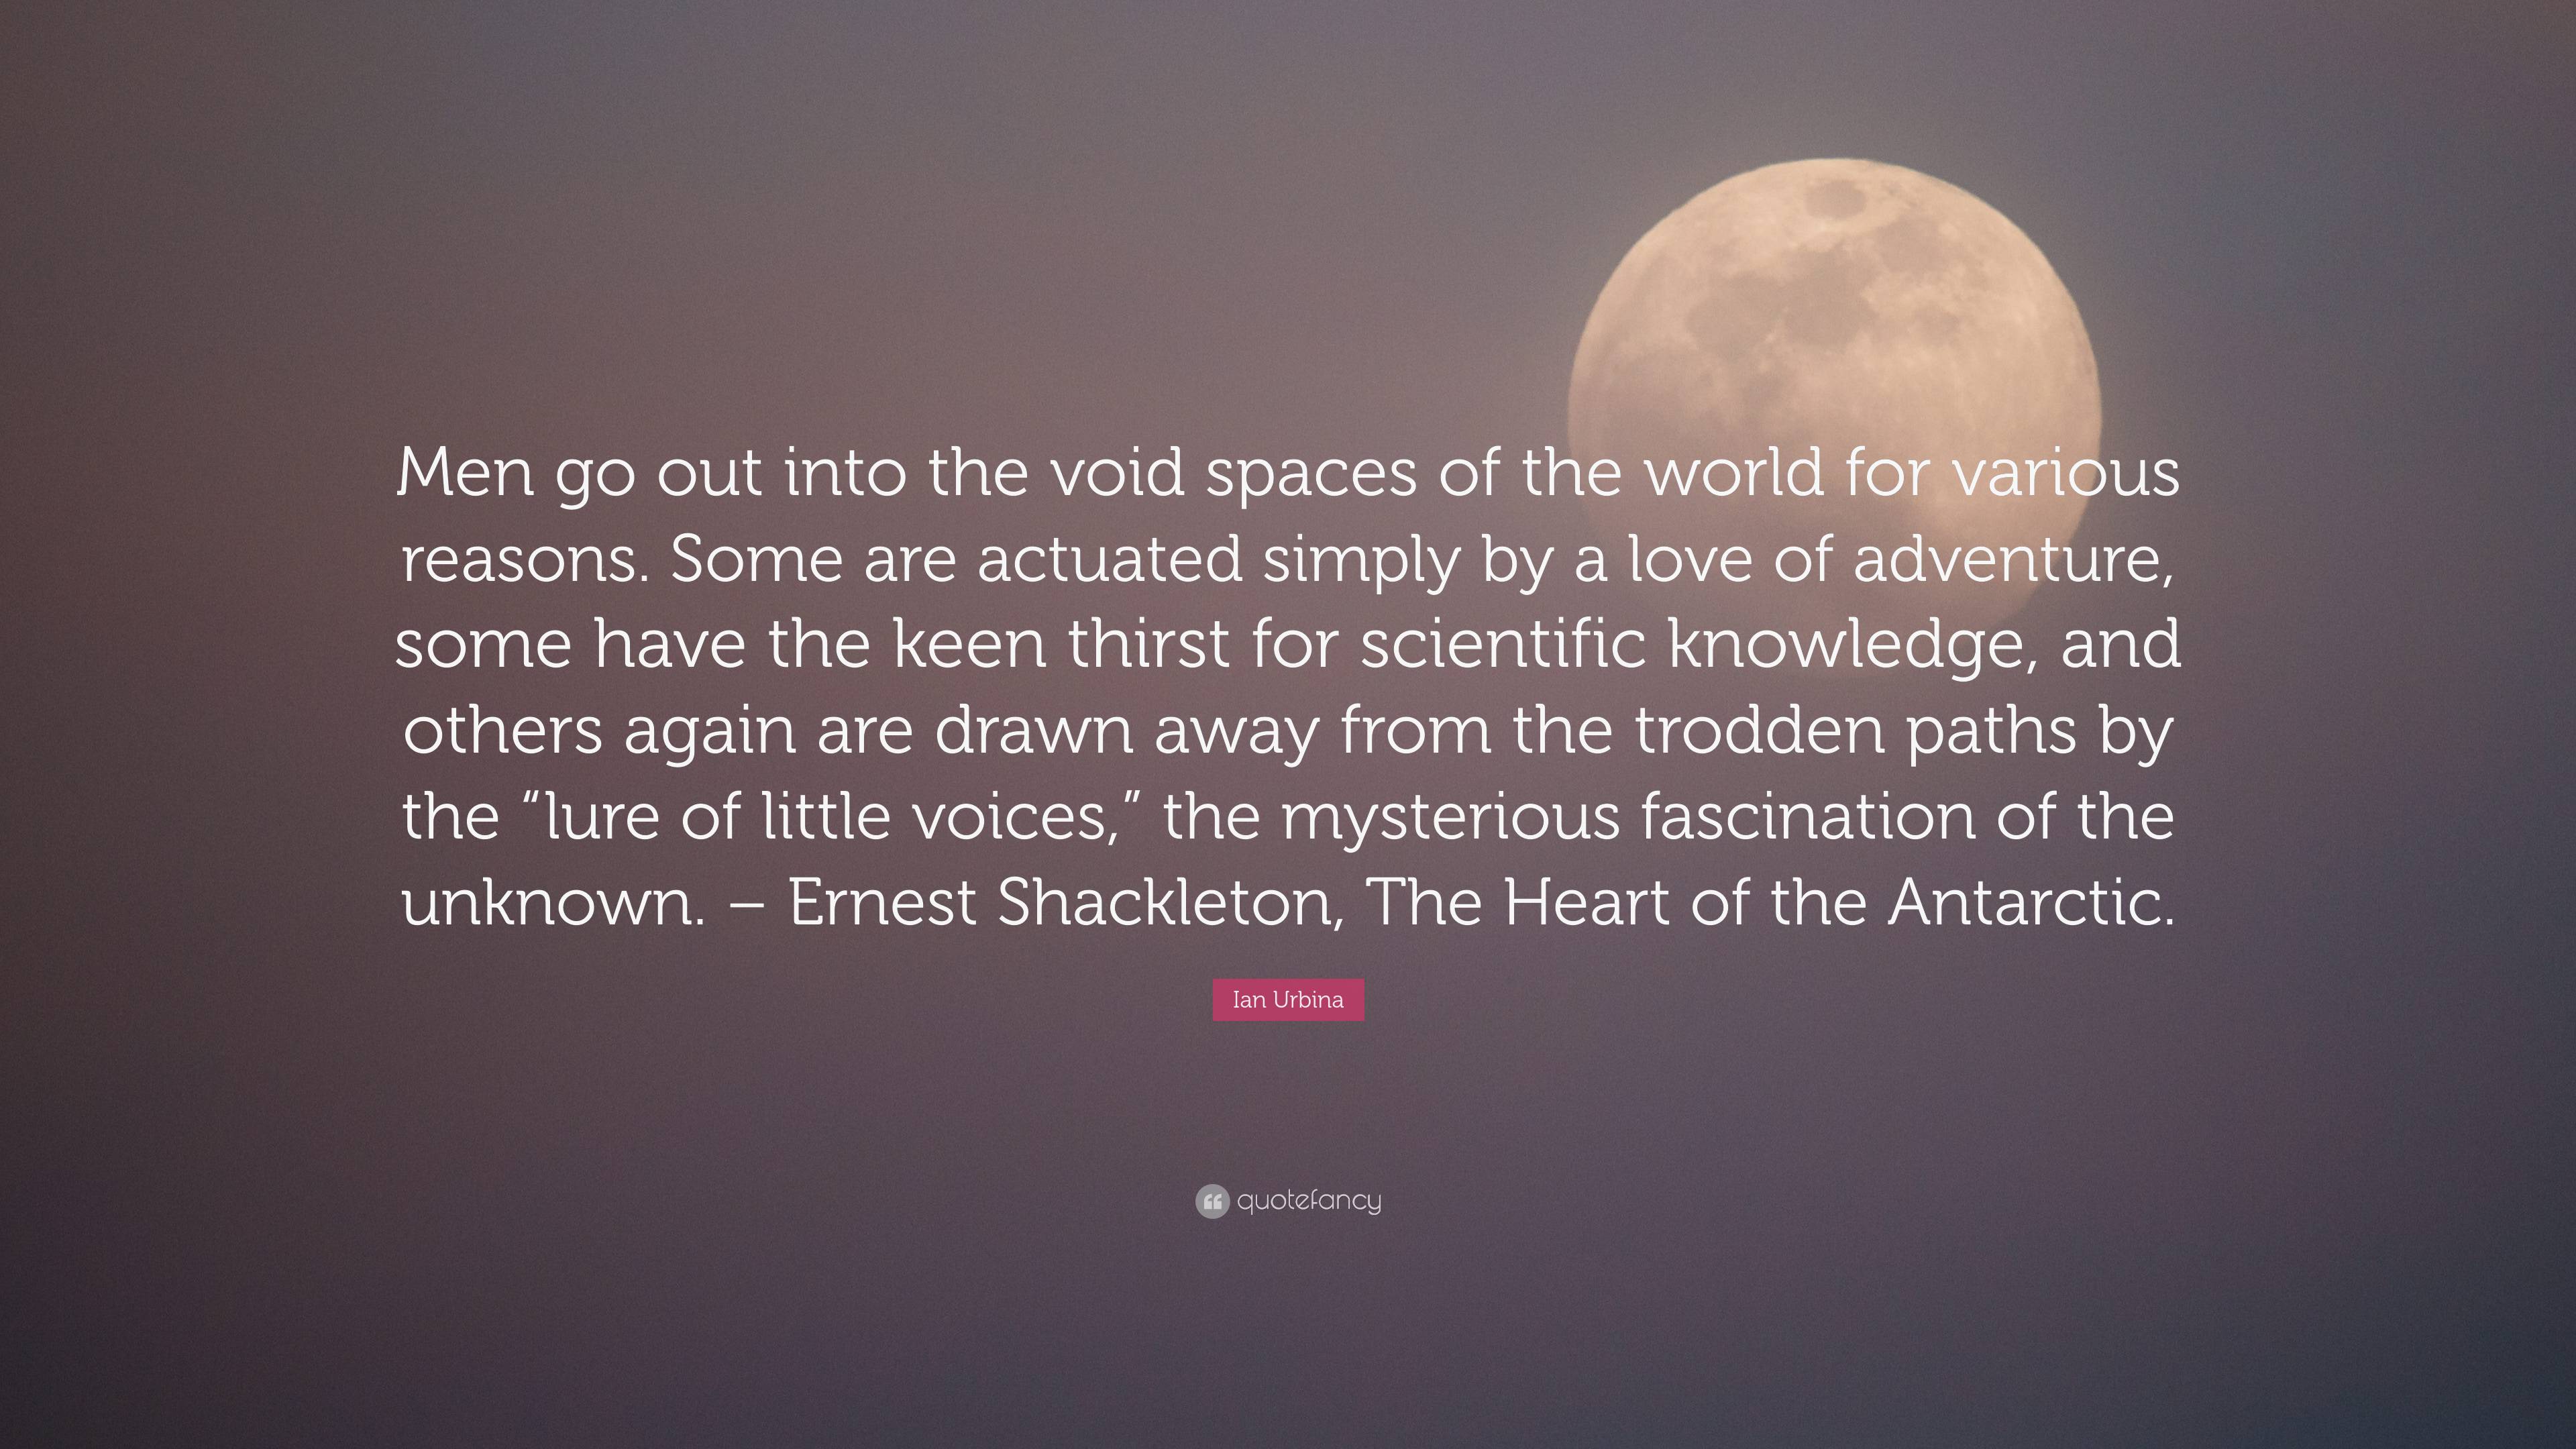 https://quotefancy.com/media/wallpaper/3840x2160/7429389-Ian-Urbina-Quote-Men-go-out-into-the-void-spaces-of-the-world-for.jpg